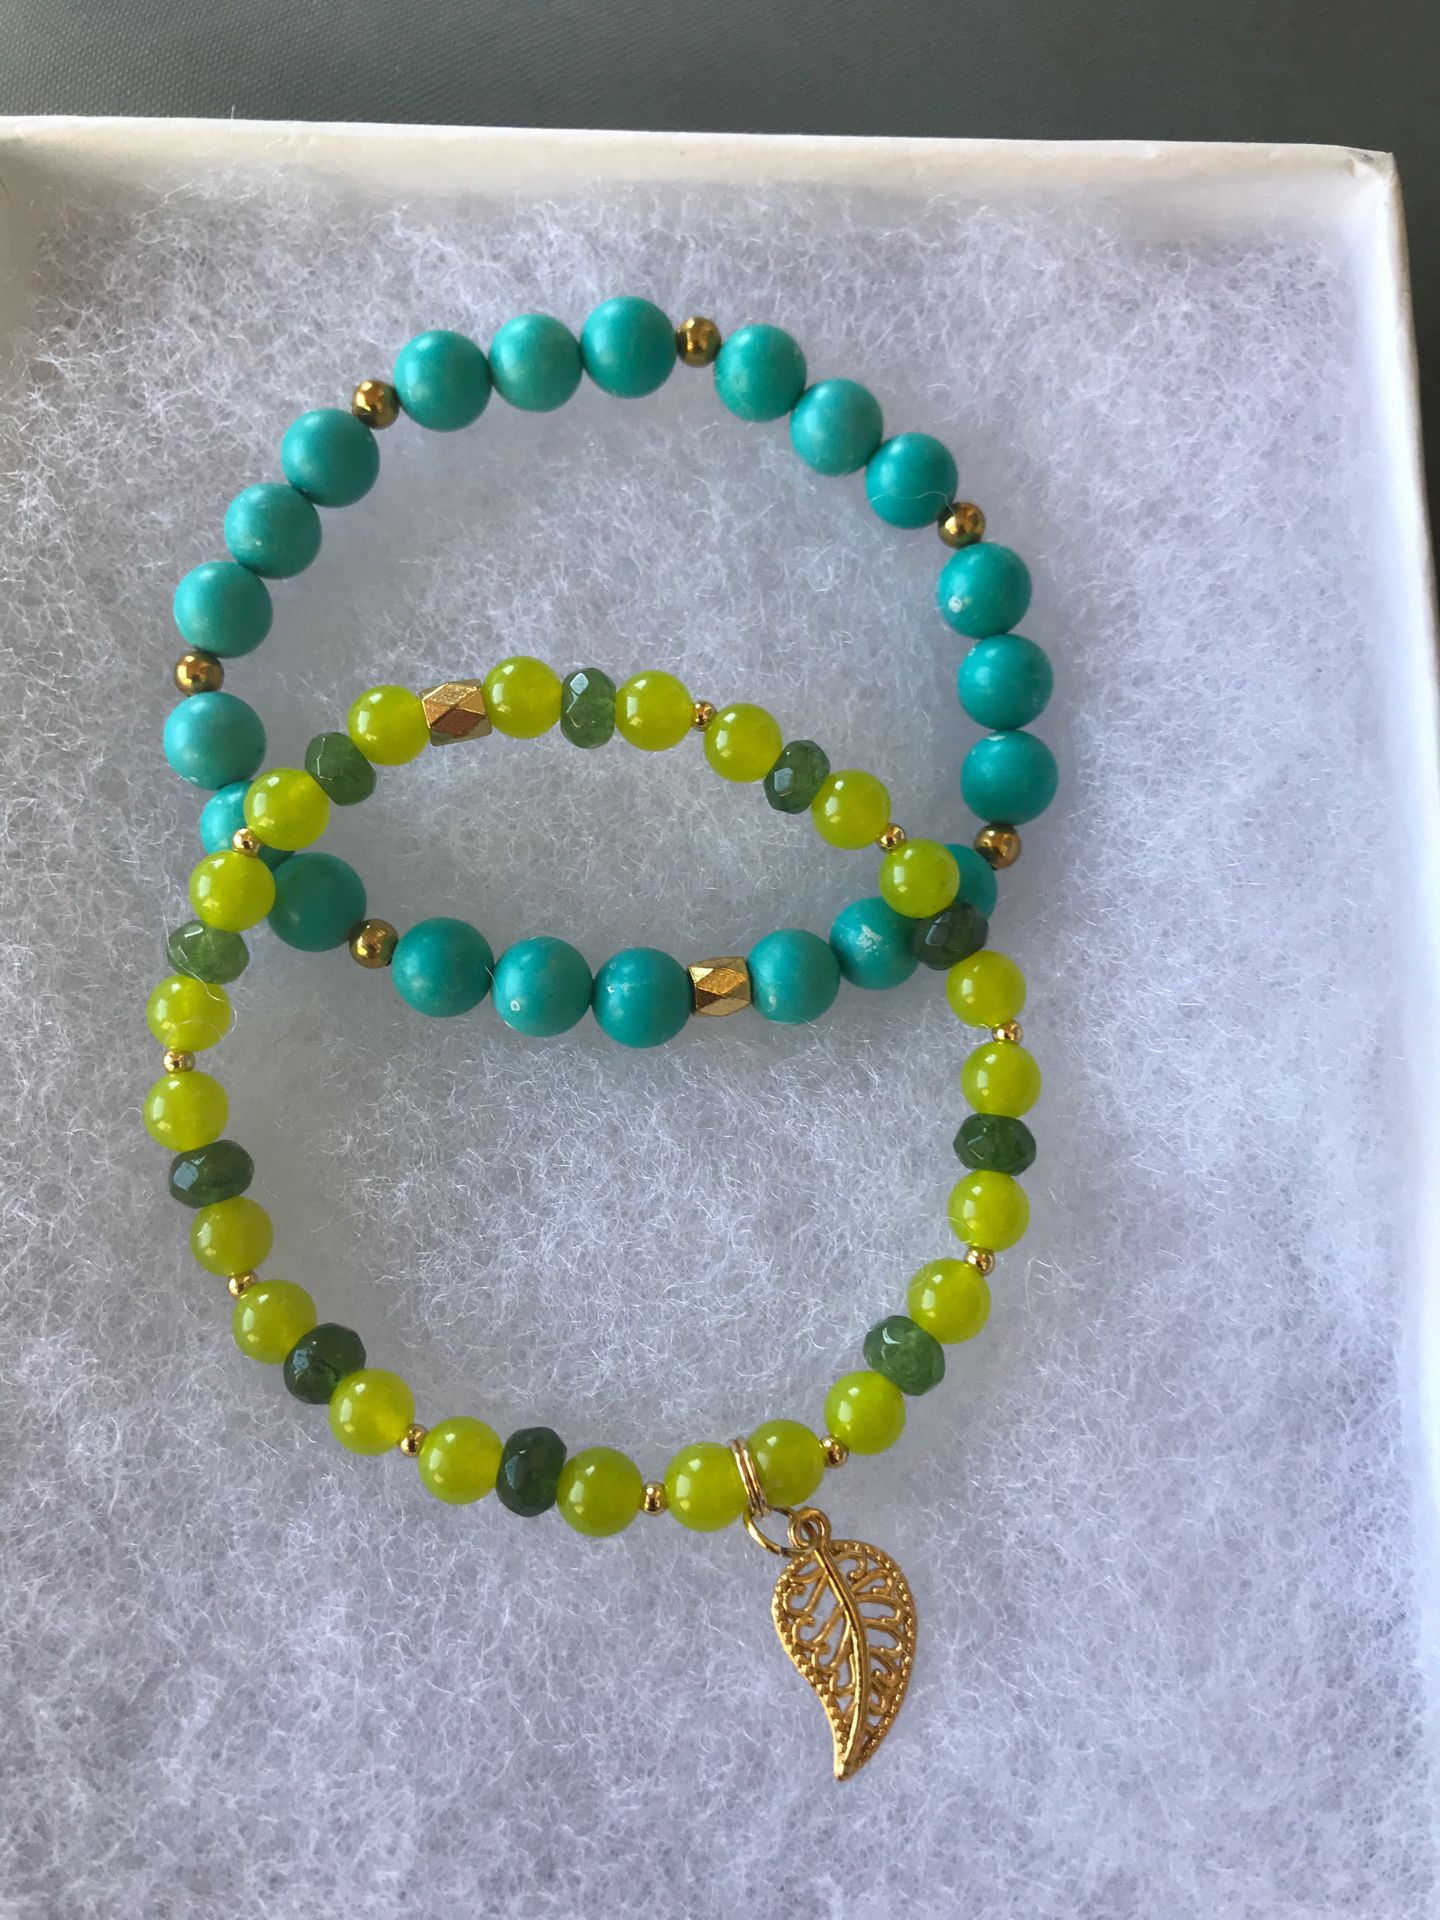 Peridot jade and and turquoise bracelets with leaf charm